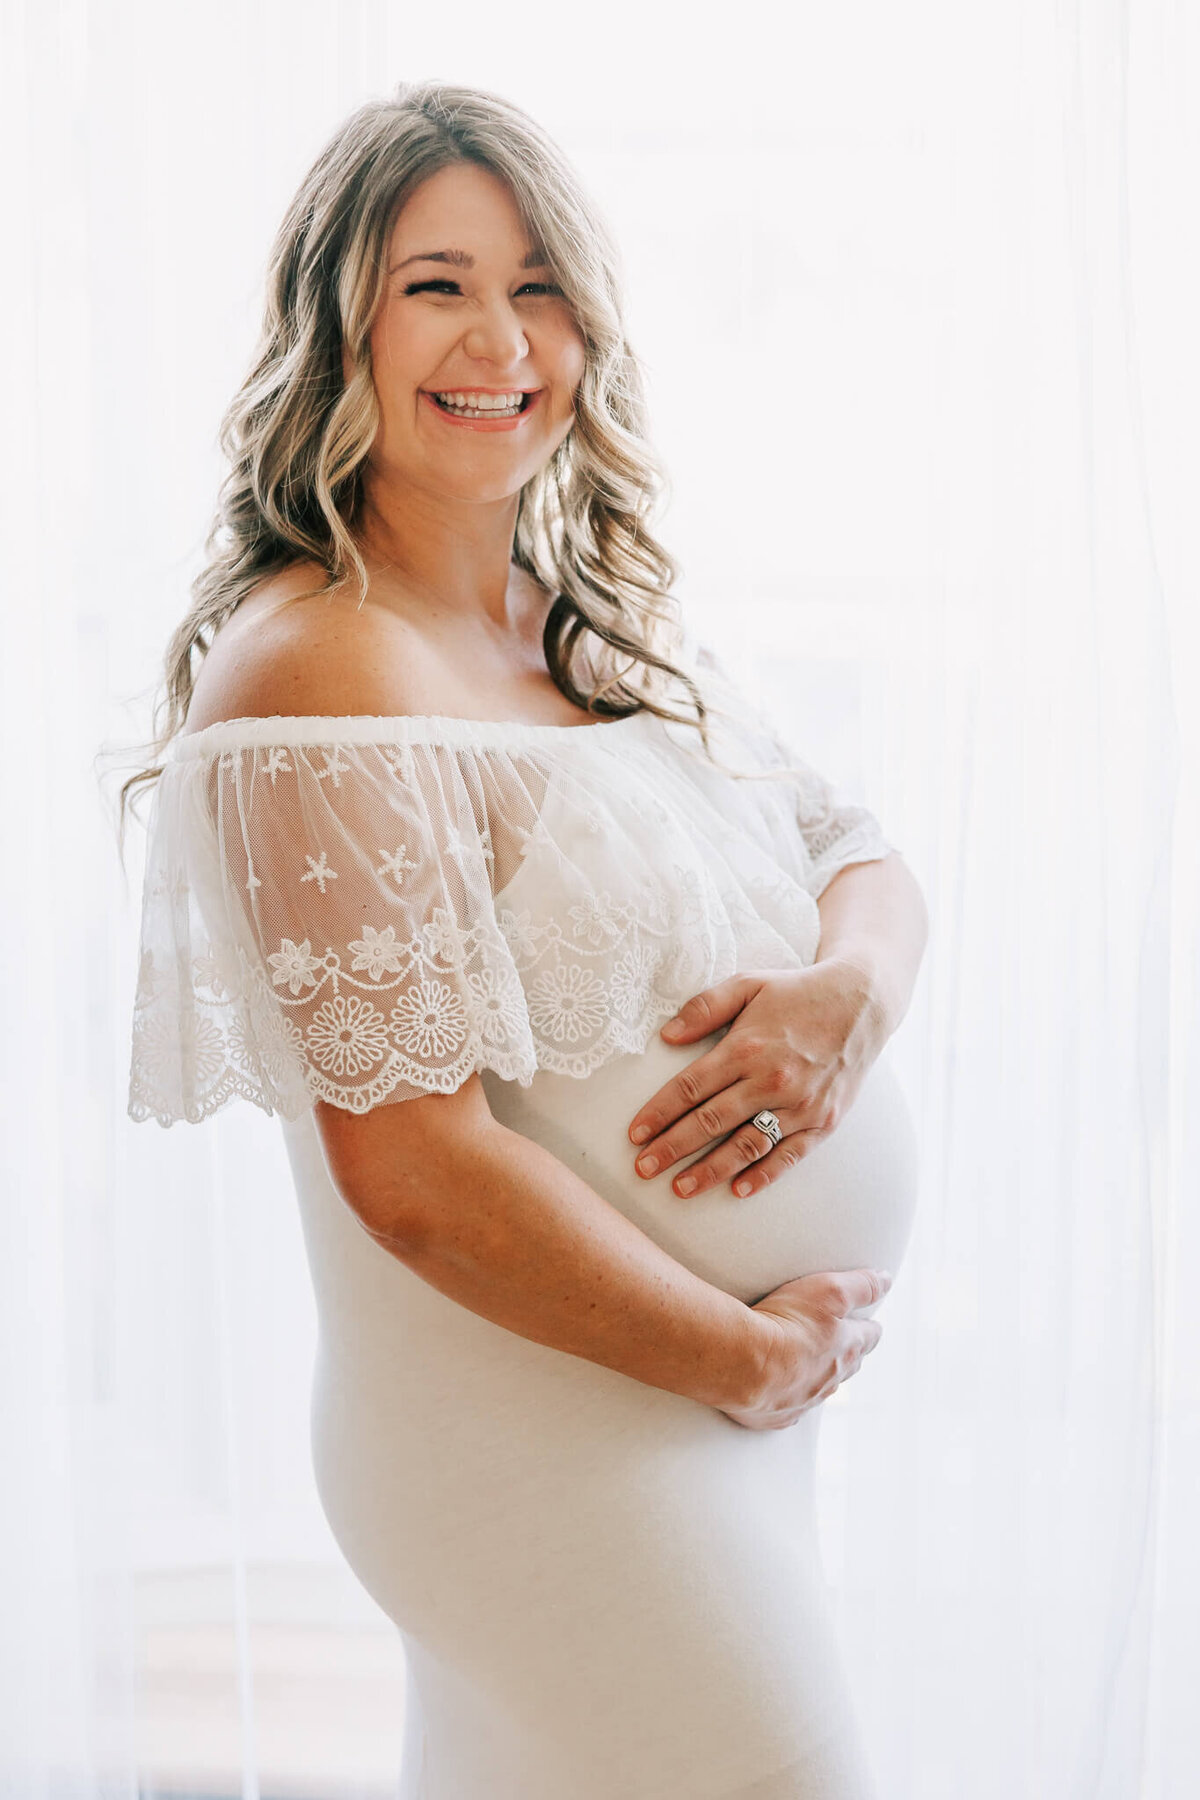 gorgeous backlit happy maternity portrait of a woman in a white dress